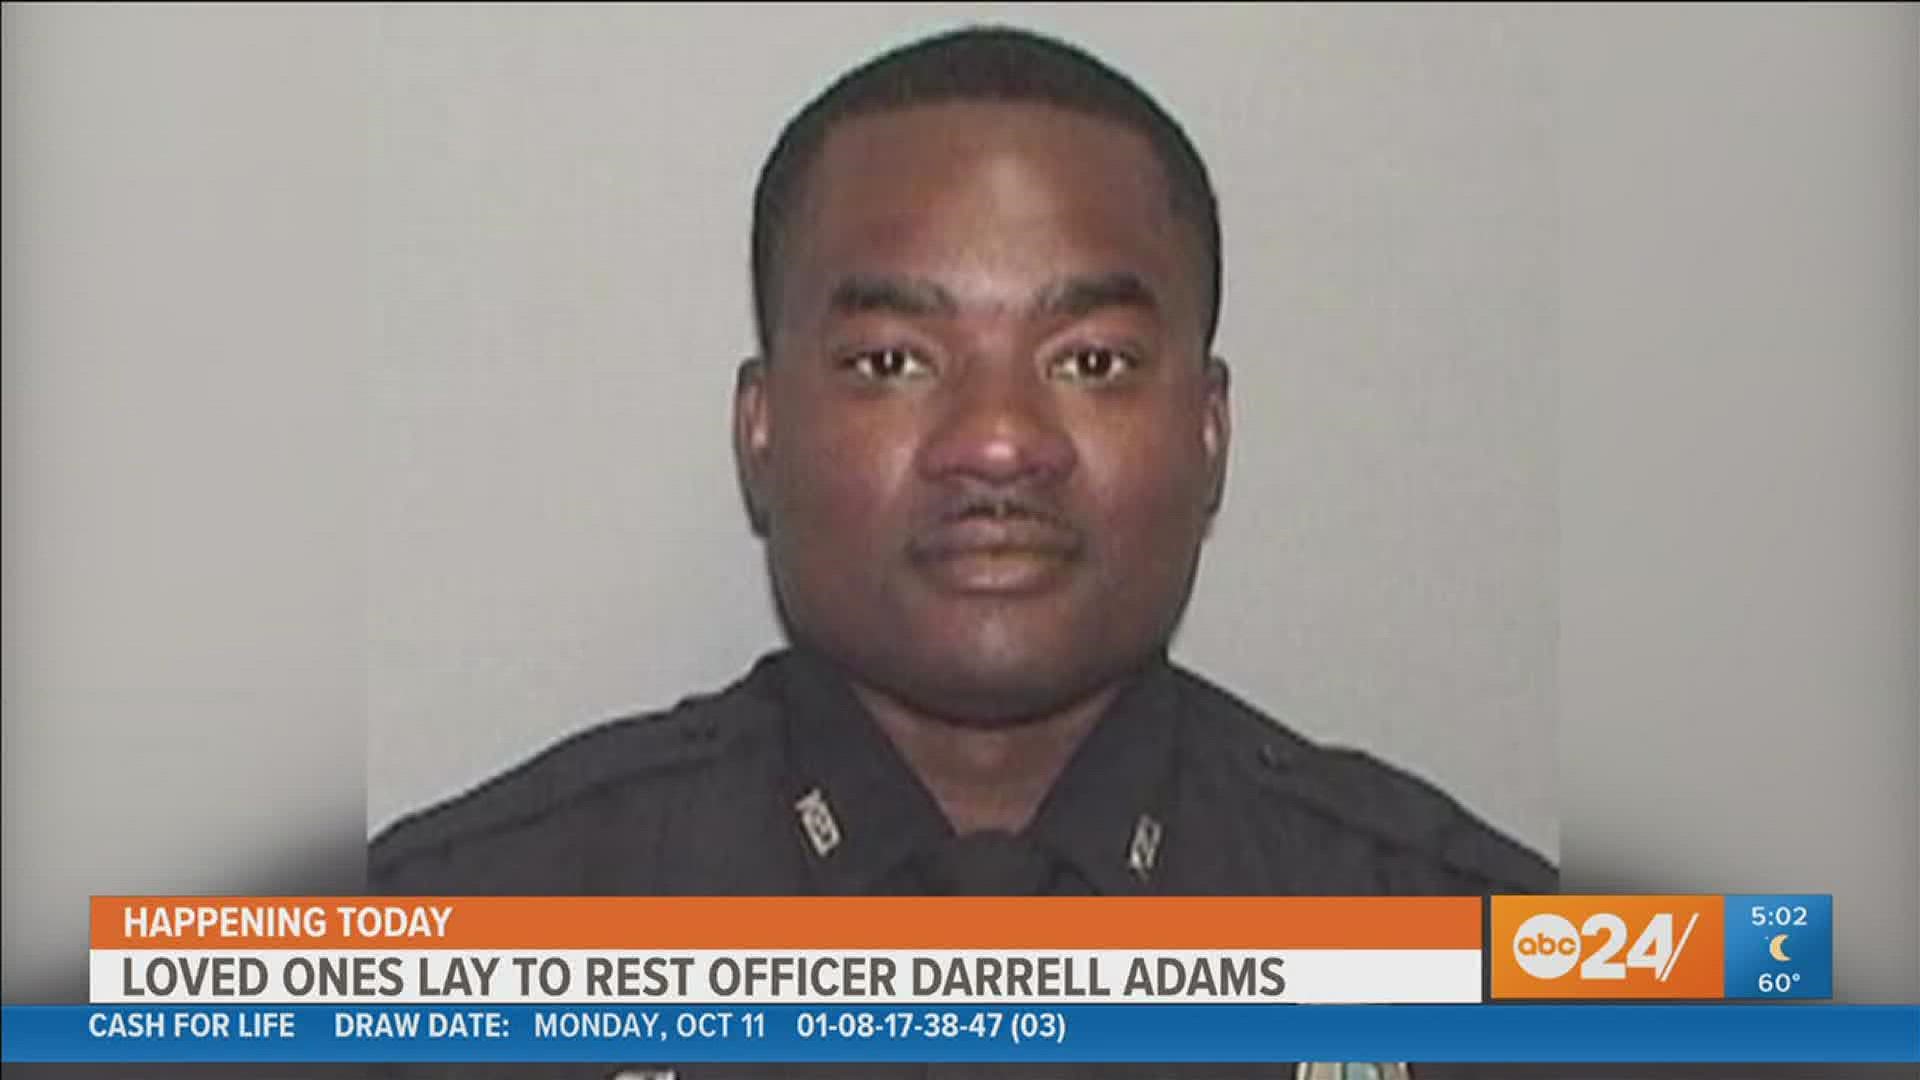 MPD Officer Darrell Adams was killed while conducting a crash investigation on I-40 earlier this month.